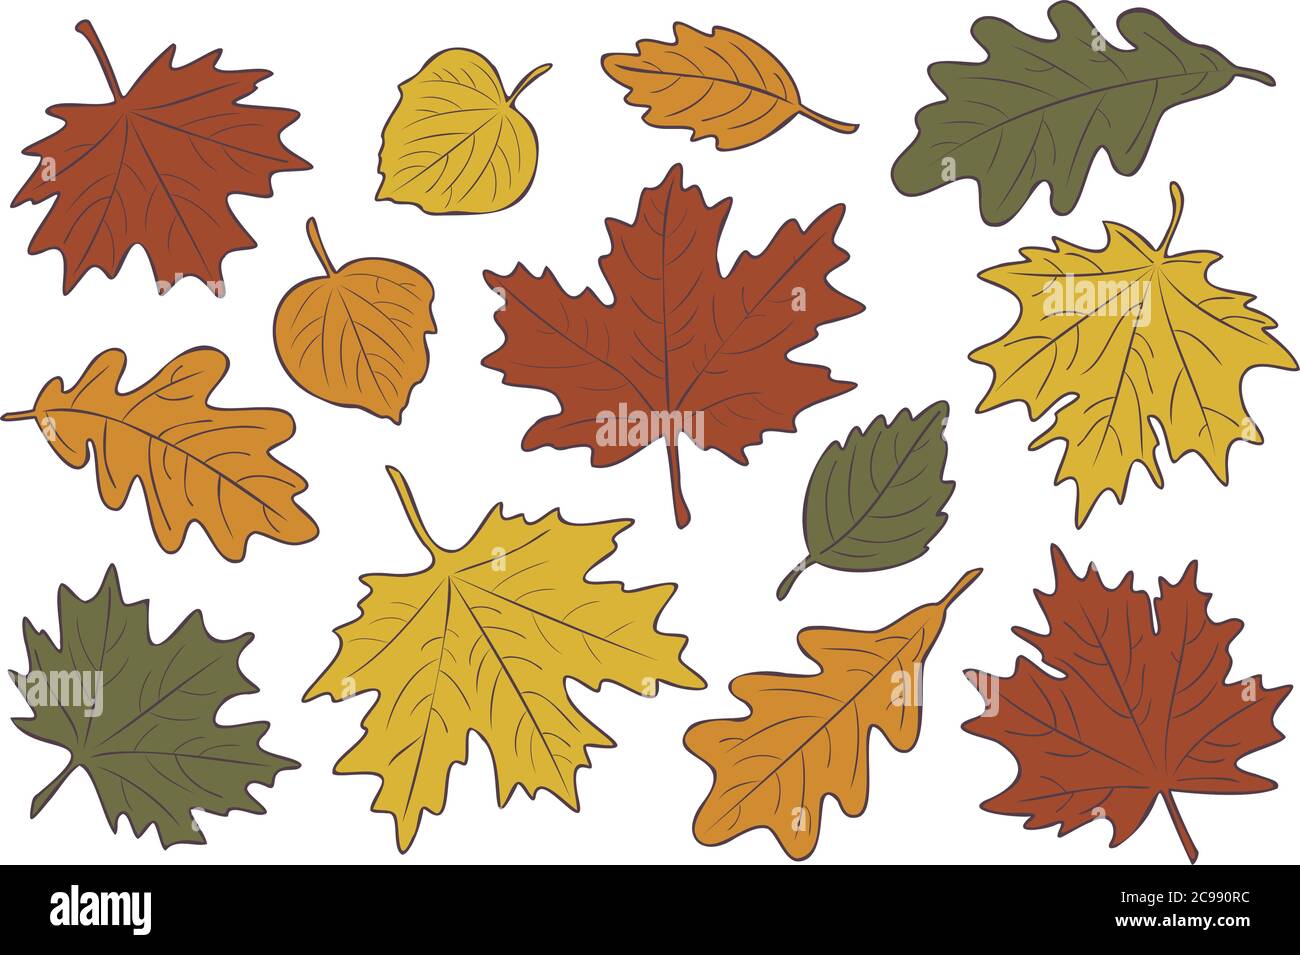 Vector illustration, set of bright realistic autumn leaves. Fall leaves background. Maple, Linden, oak and birch leaves. Stock Vector